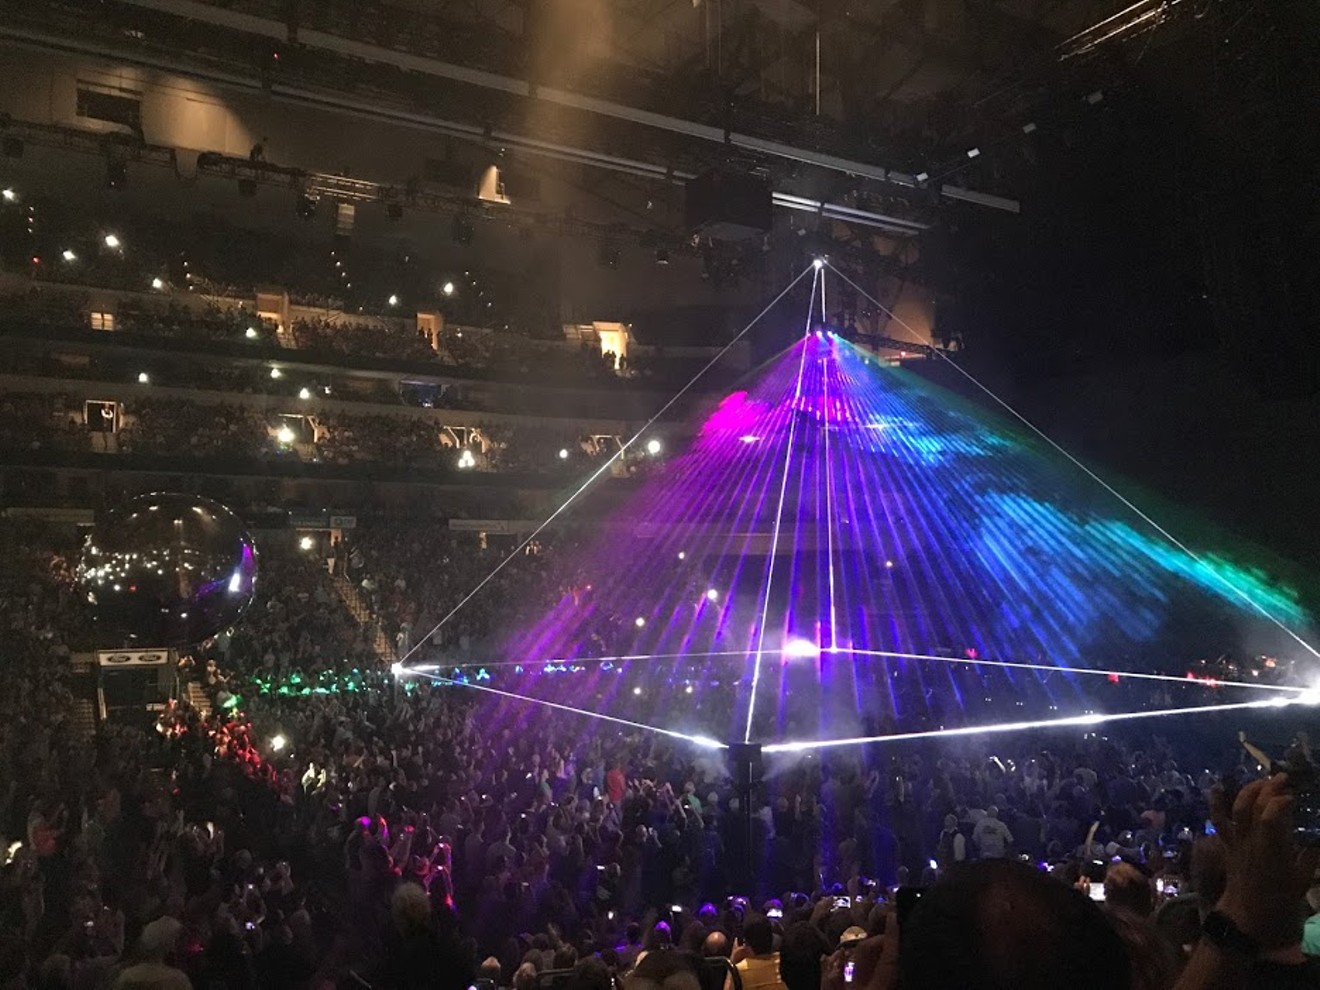 Those who attended Friday's show won't be able to go to a half-assed Pink Floyd laser extravaganza ever again.